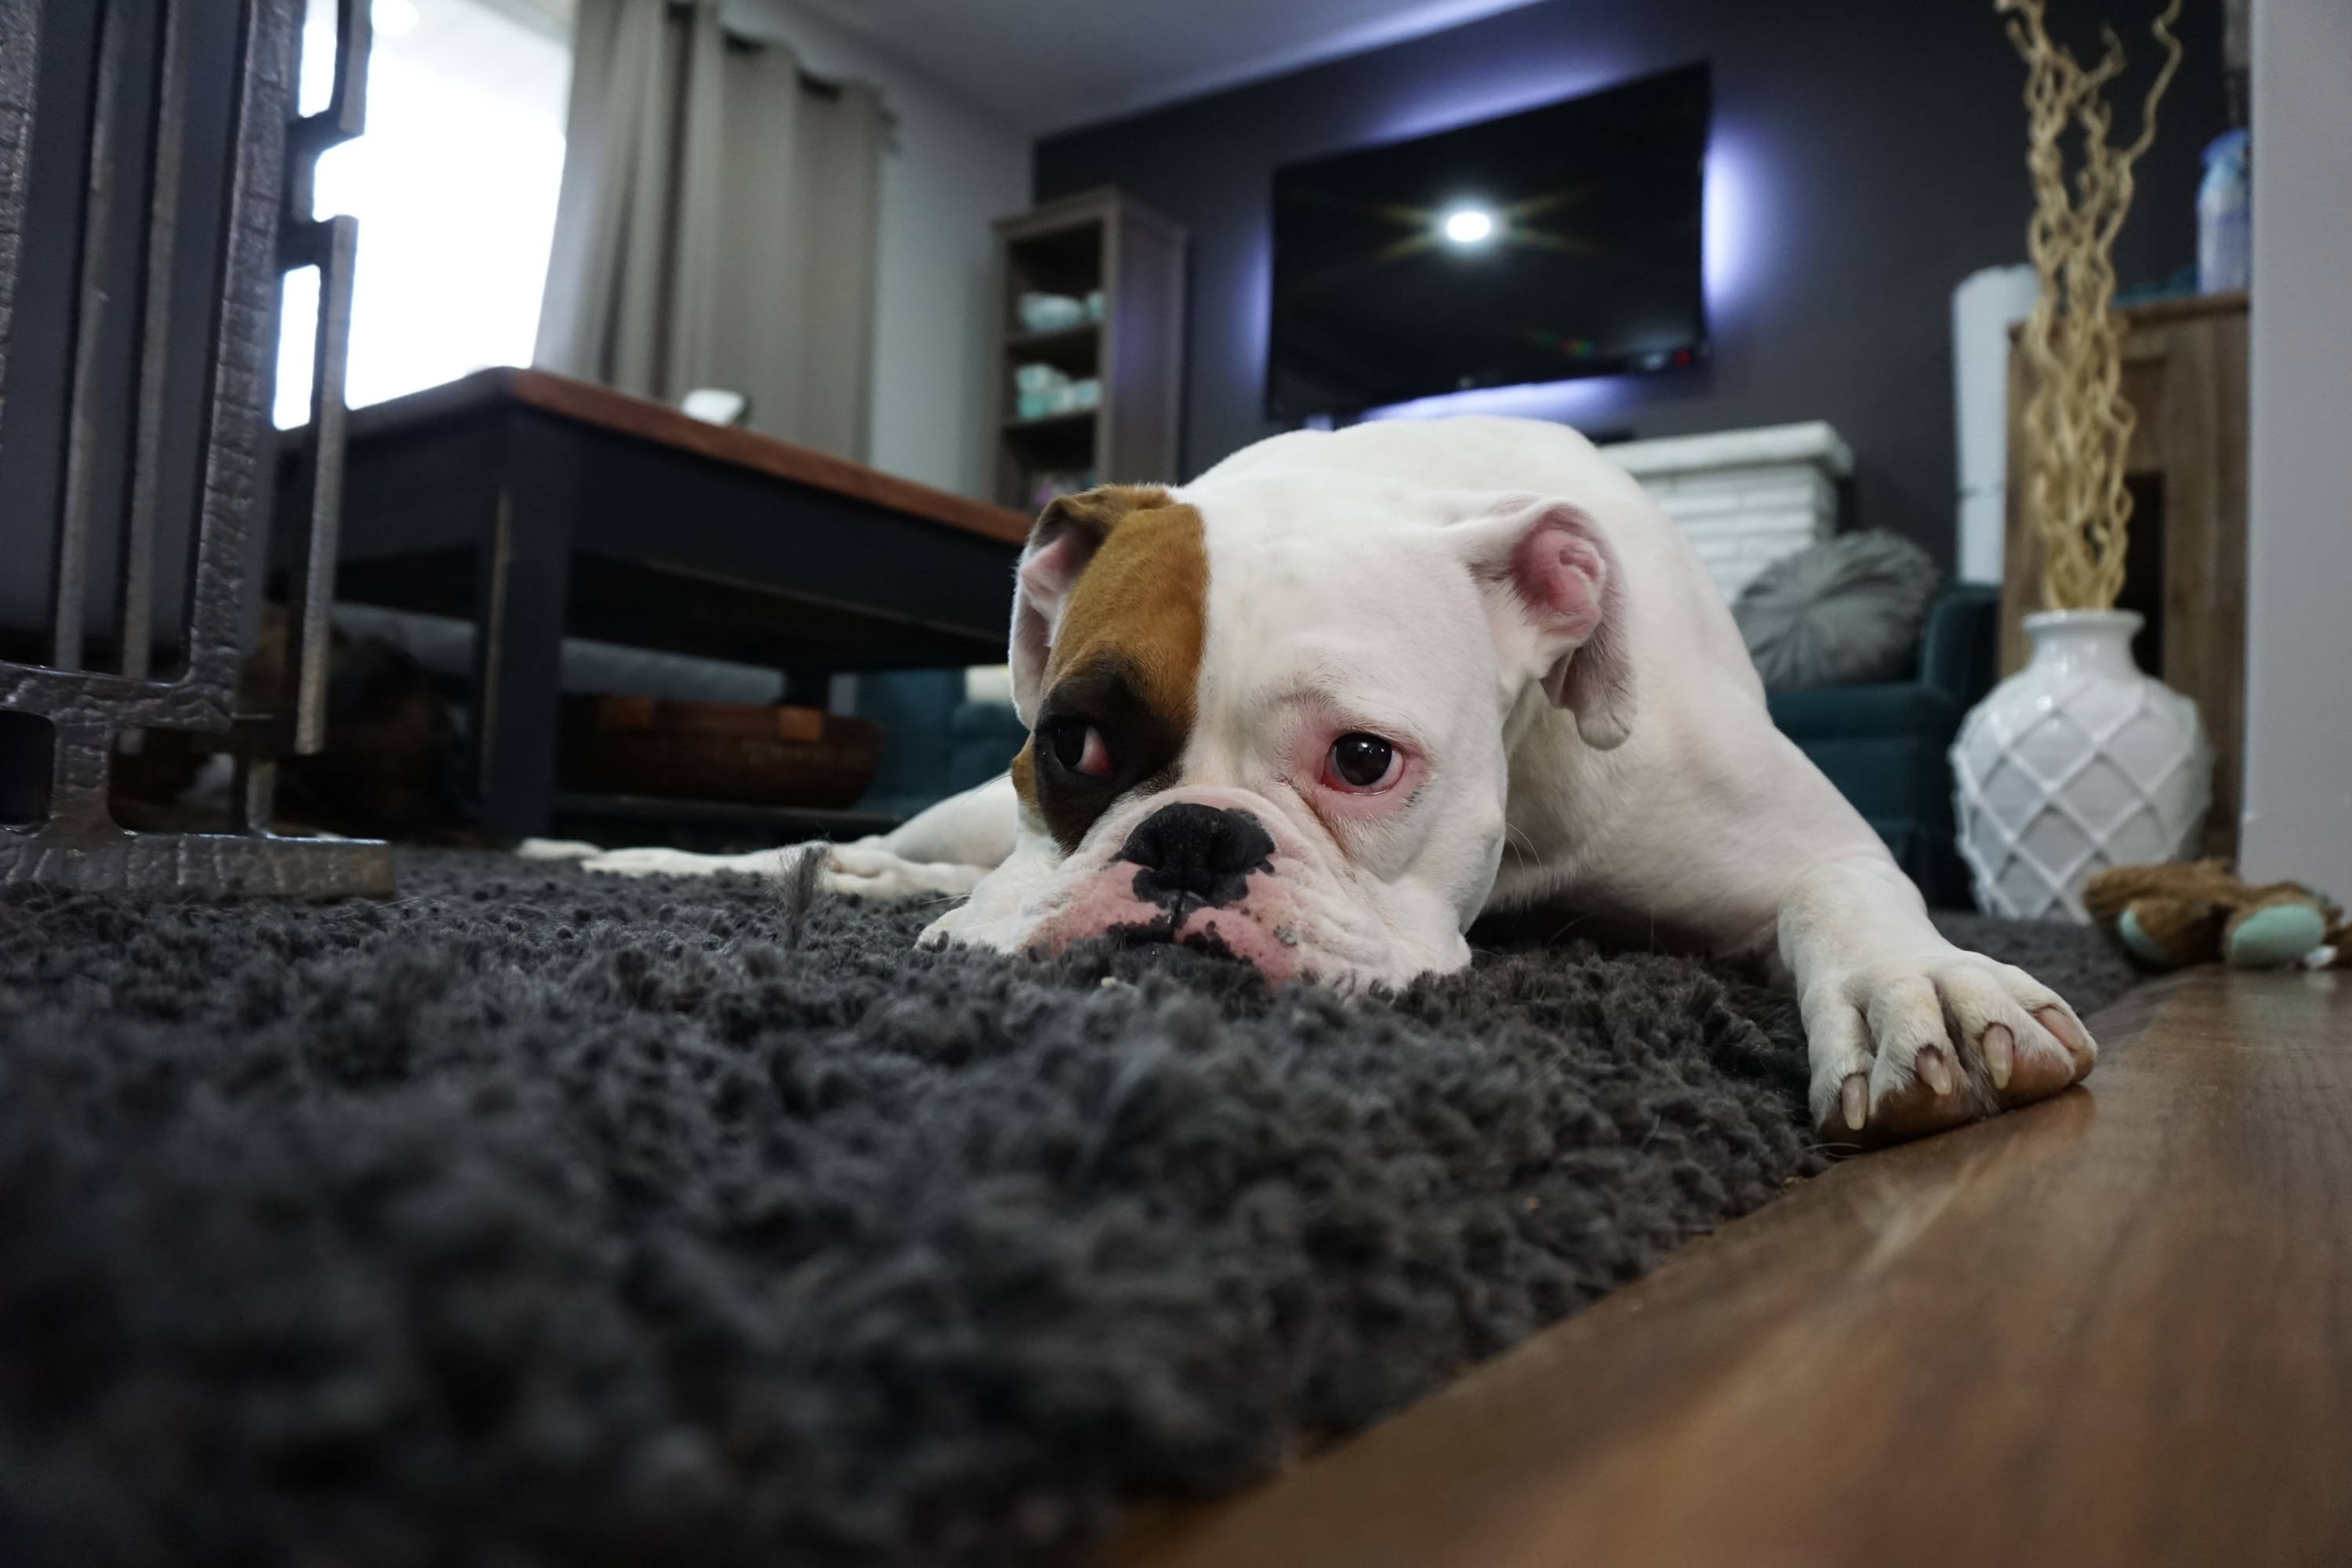 5 Indicators That Your Dog May Be Lonely - Team K9